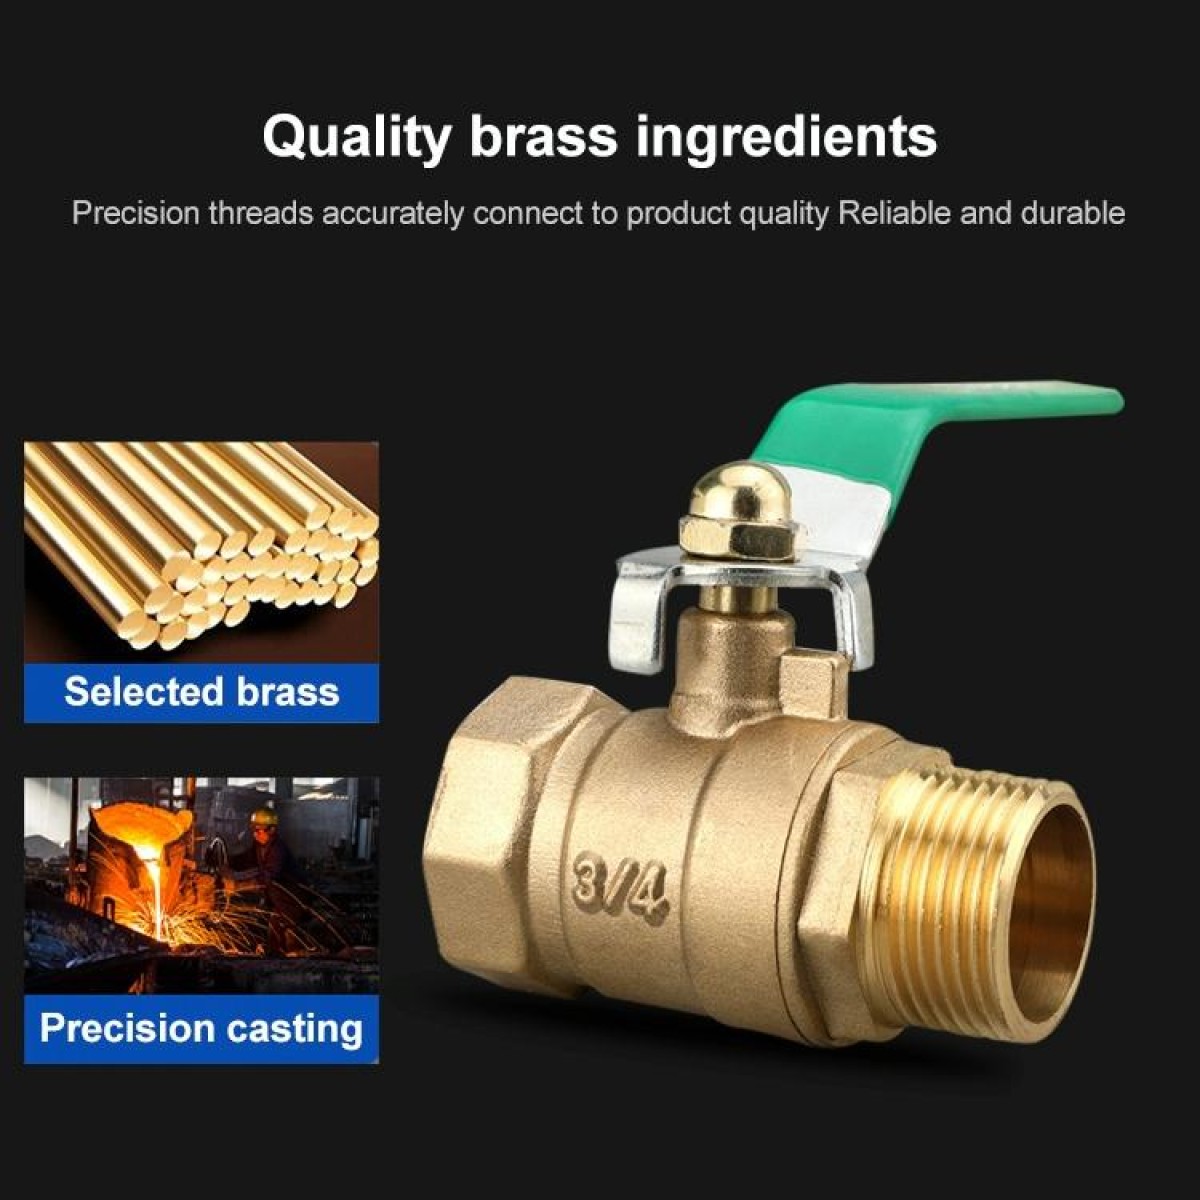 LAIZE Pneumatic Hose Connector Thickened Brass Ball Valve, Size:Double Inside 2 Point 1/4 inch